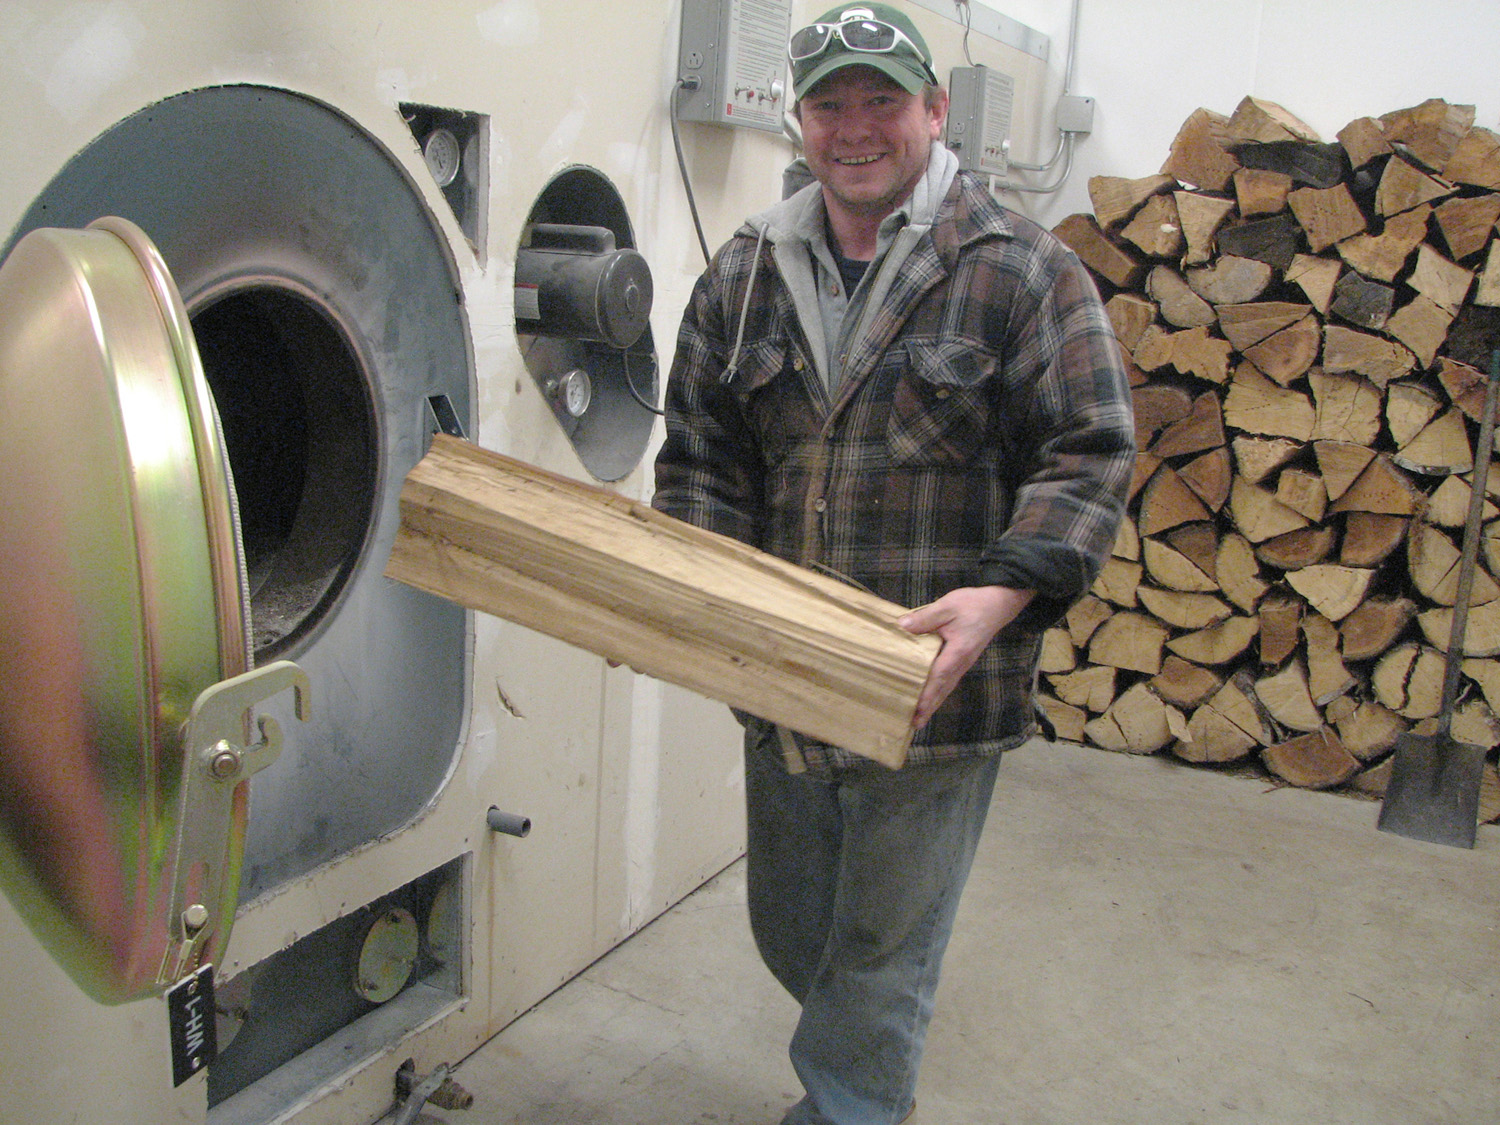 AEA Seeks Competitive Applications for Design of Wood Heating System